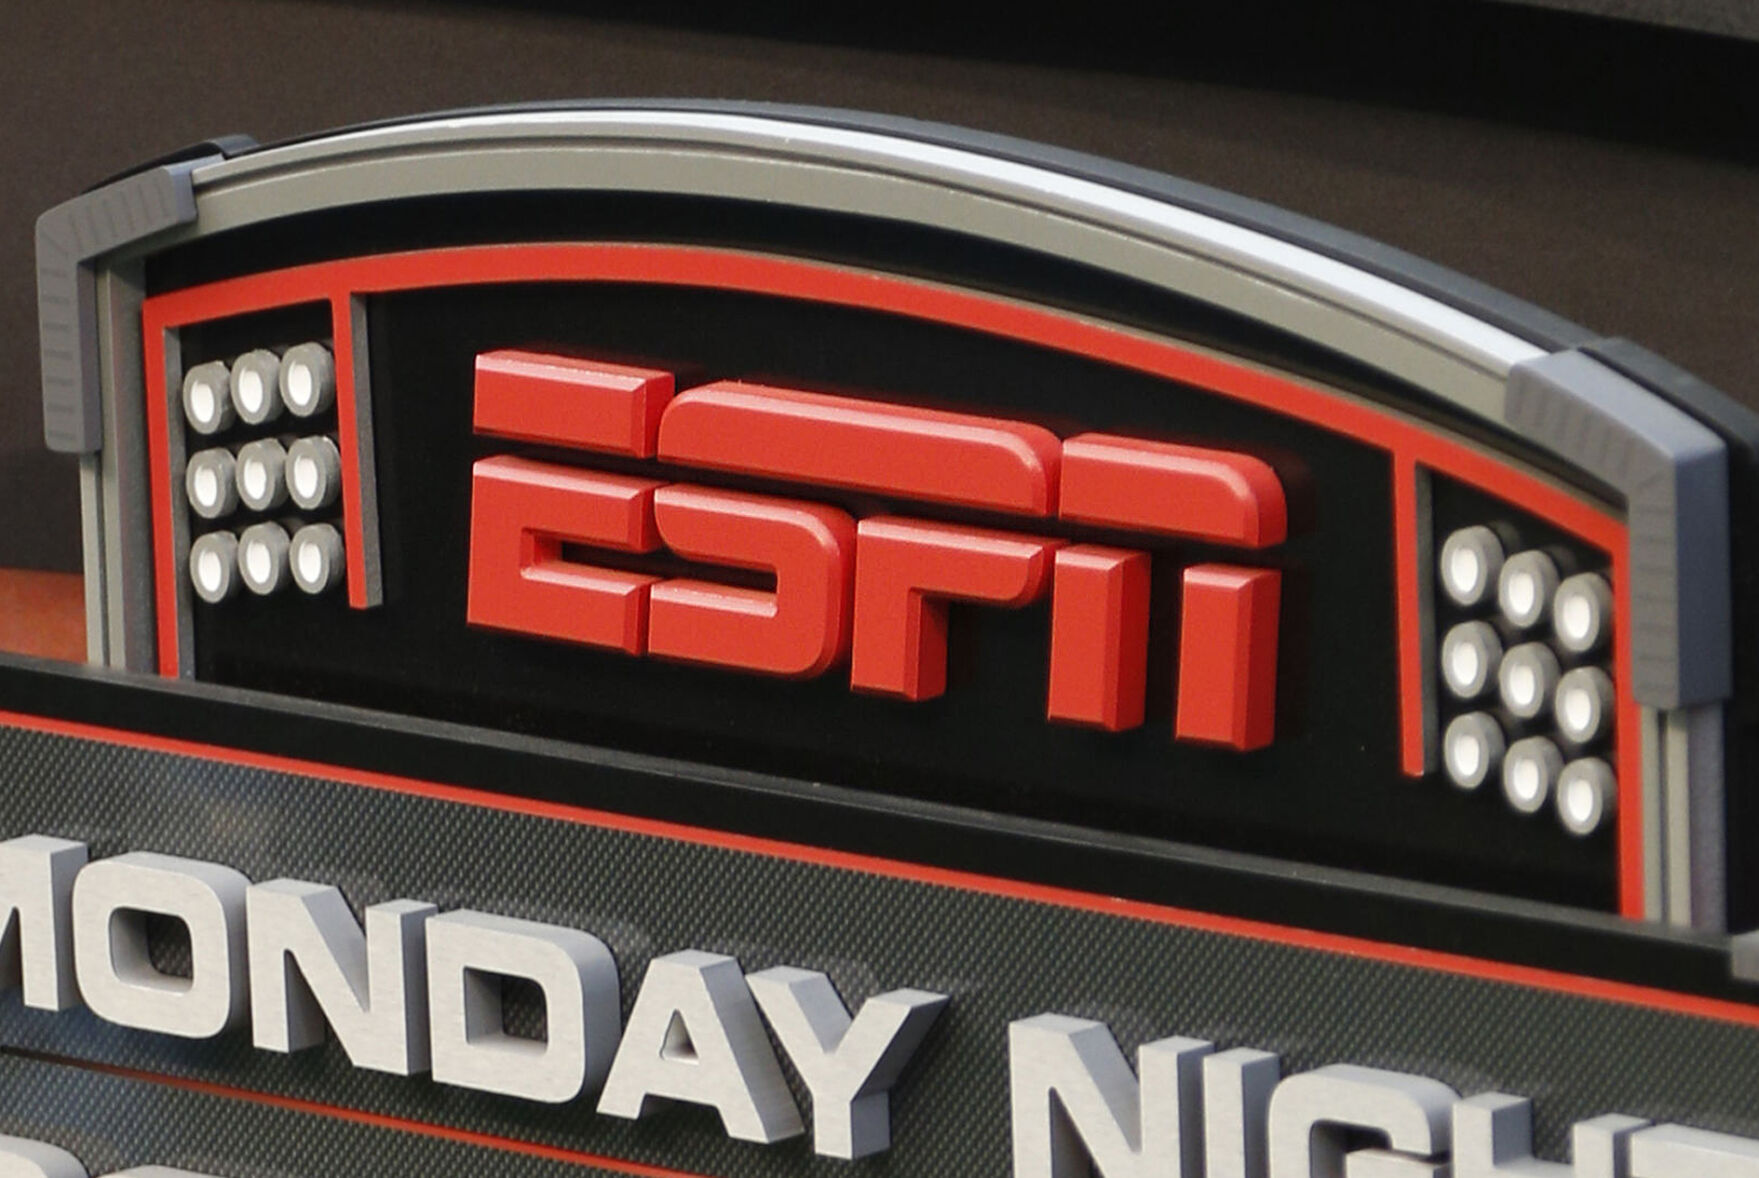 ESPN networks go dark on Charter Spectrum on busy night for sports